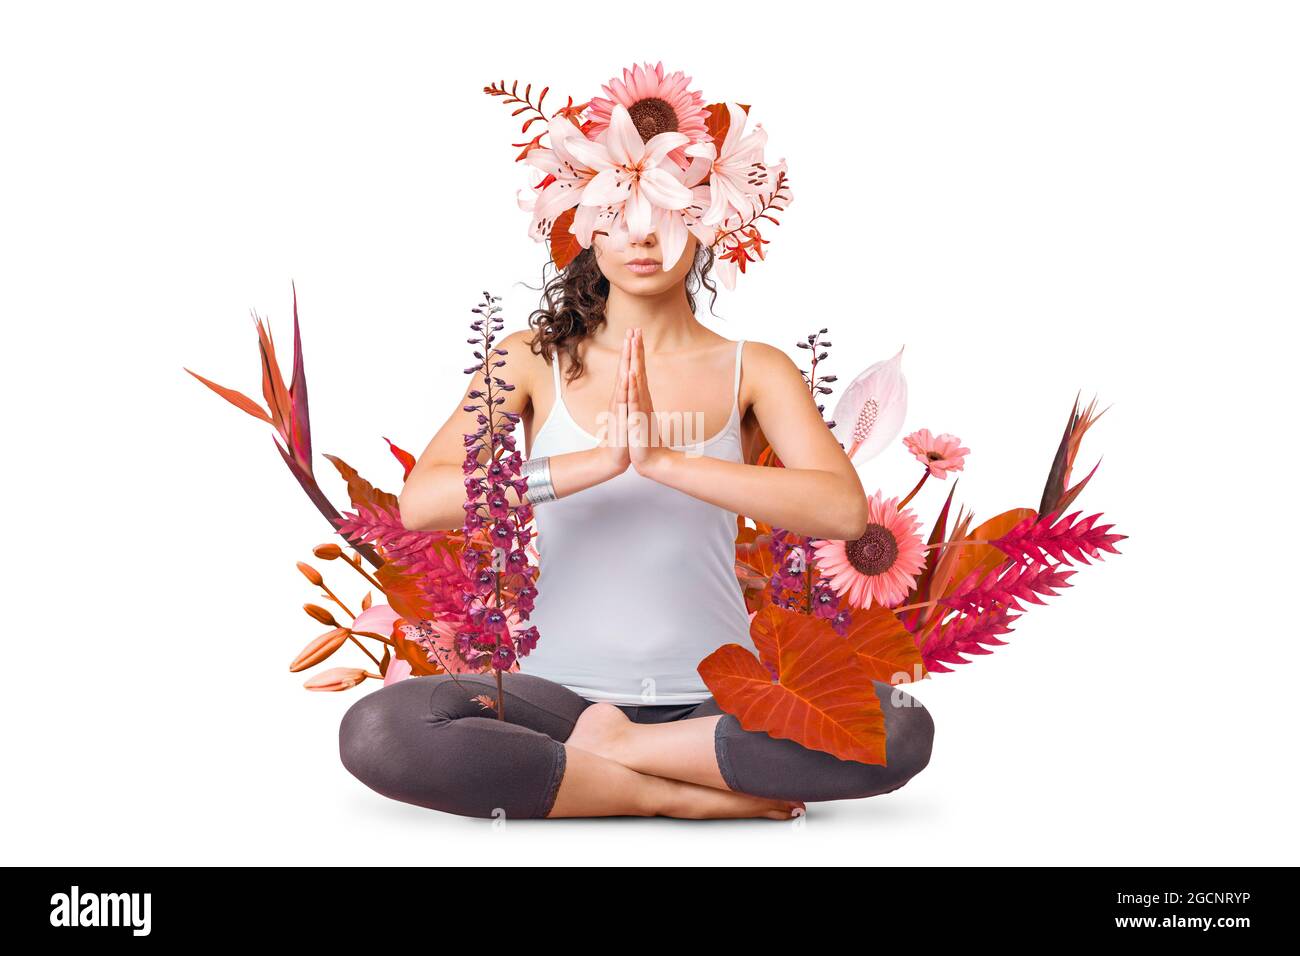 Abstract art design of young woman doing yoga with flowers around body isolated on white background Stock Photo